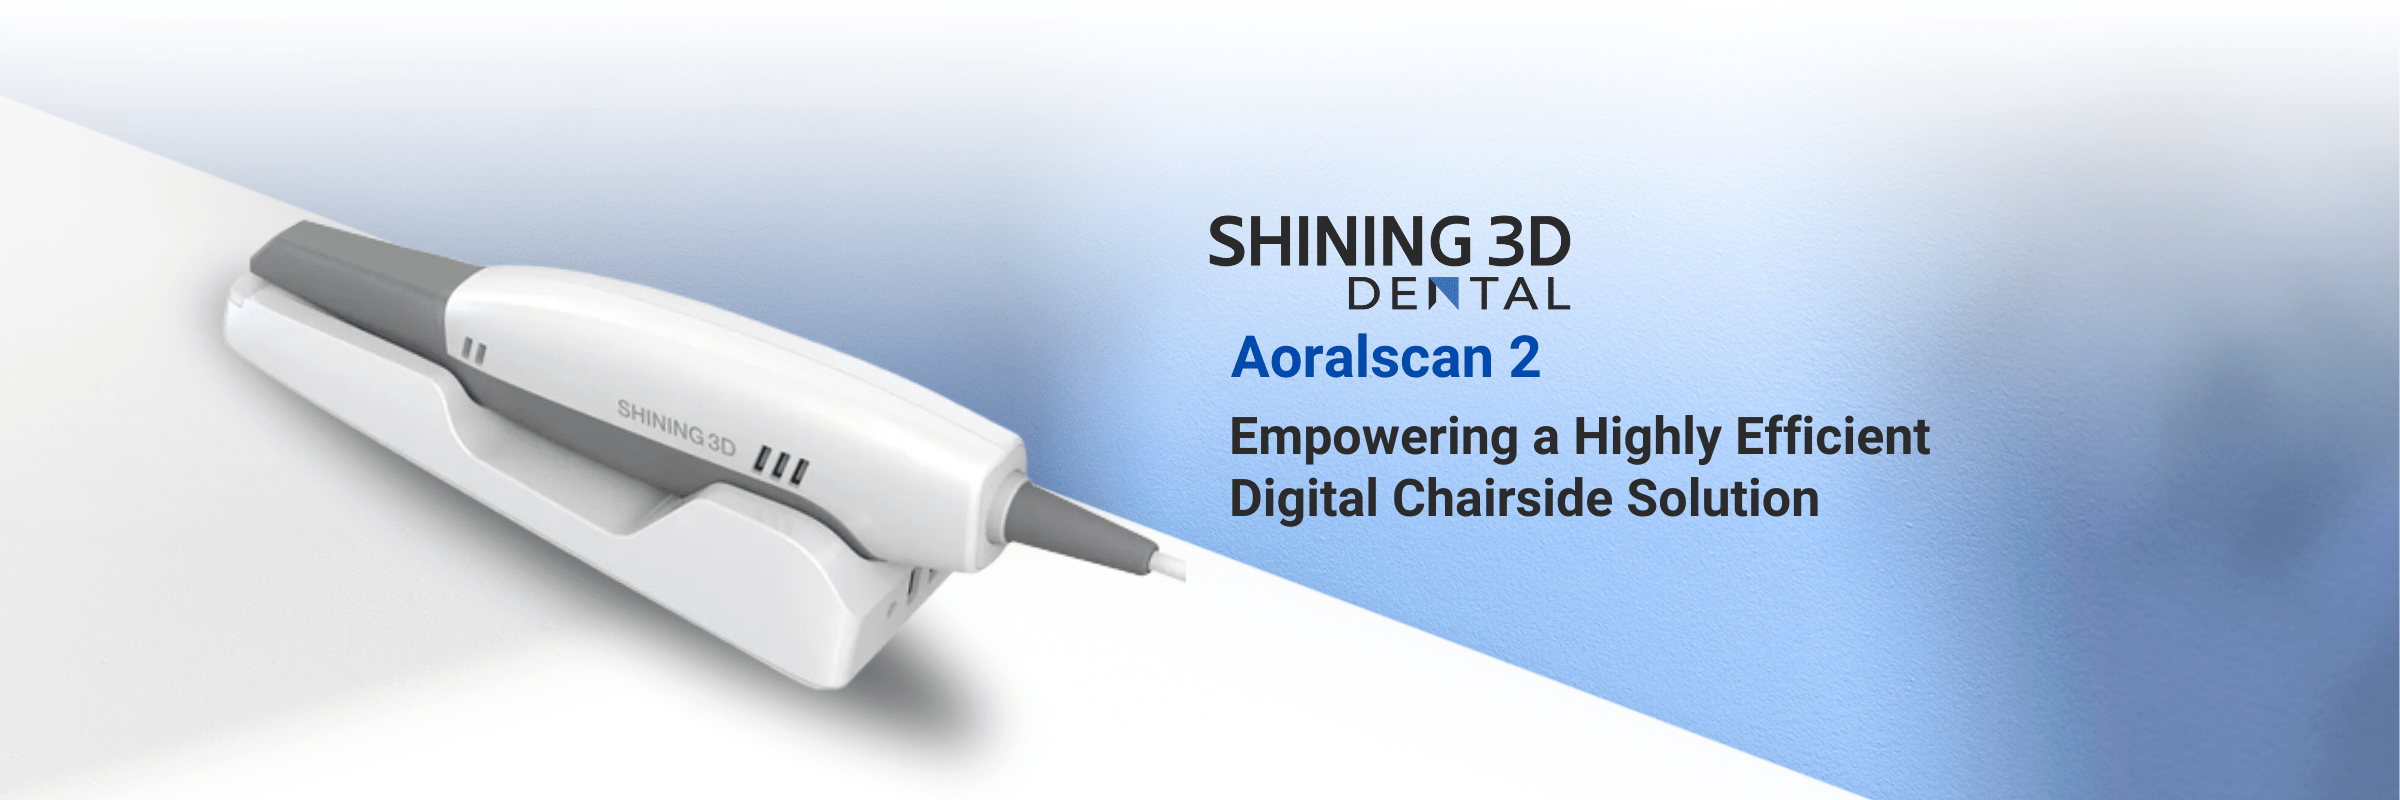 Shinning 3D Aoralscan 2 Product Page Banner